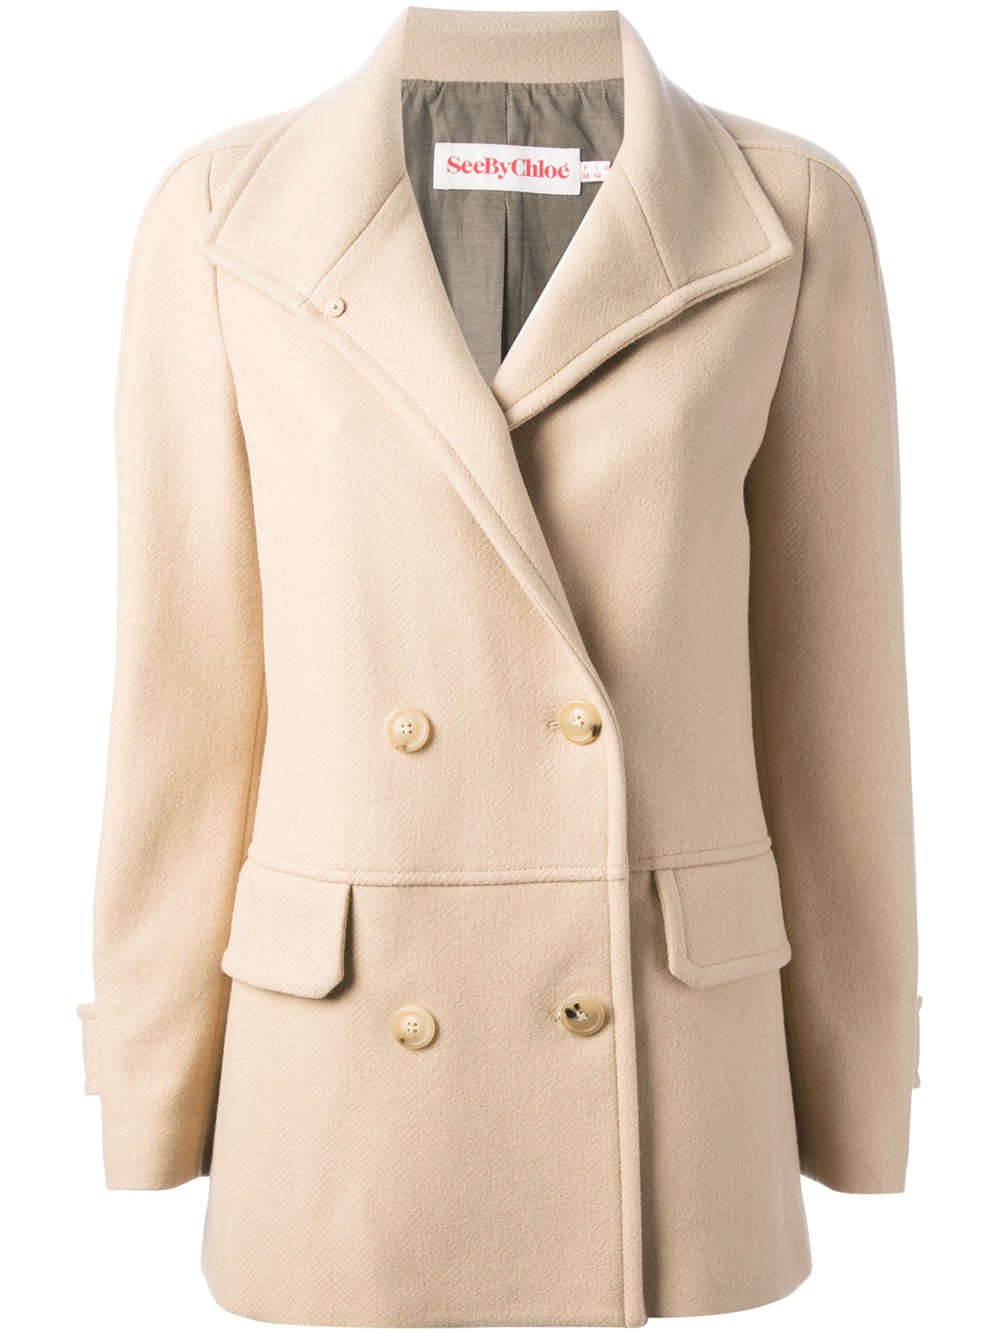 Lyst - See By Chloé Doublebreasted Coat in Natural